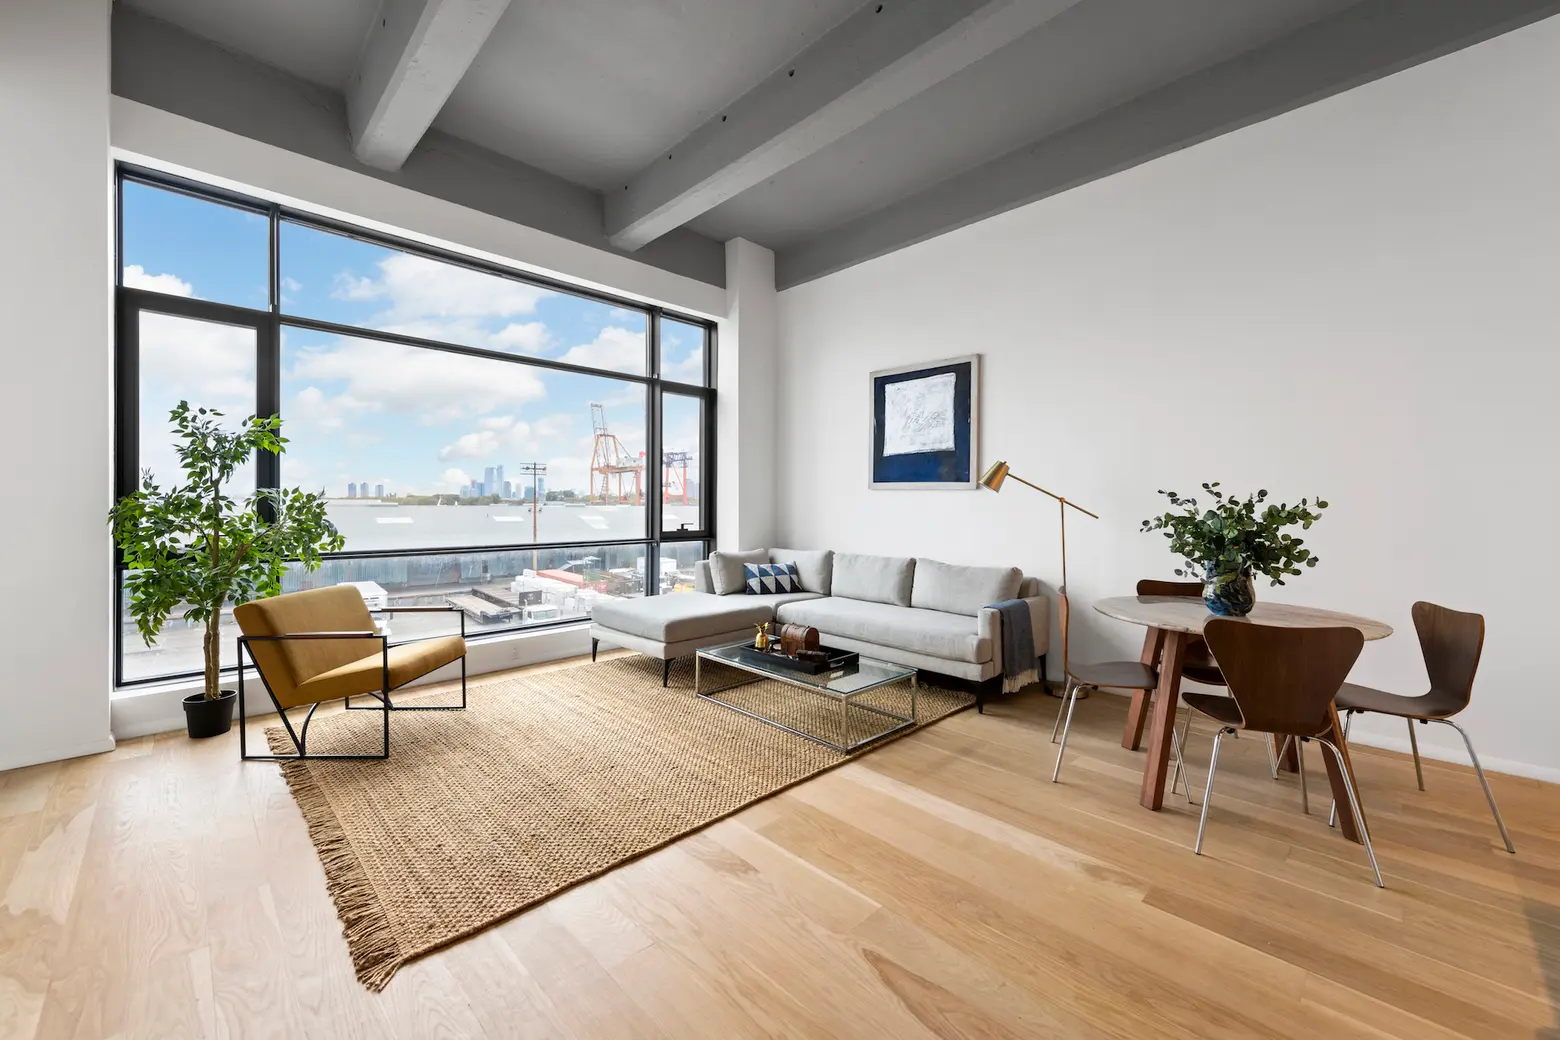 This $995K Red Hook loft has amazing views of the Statue of Liberty and World Trade Center